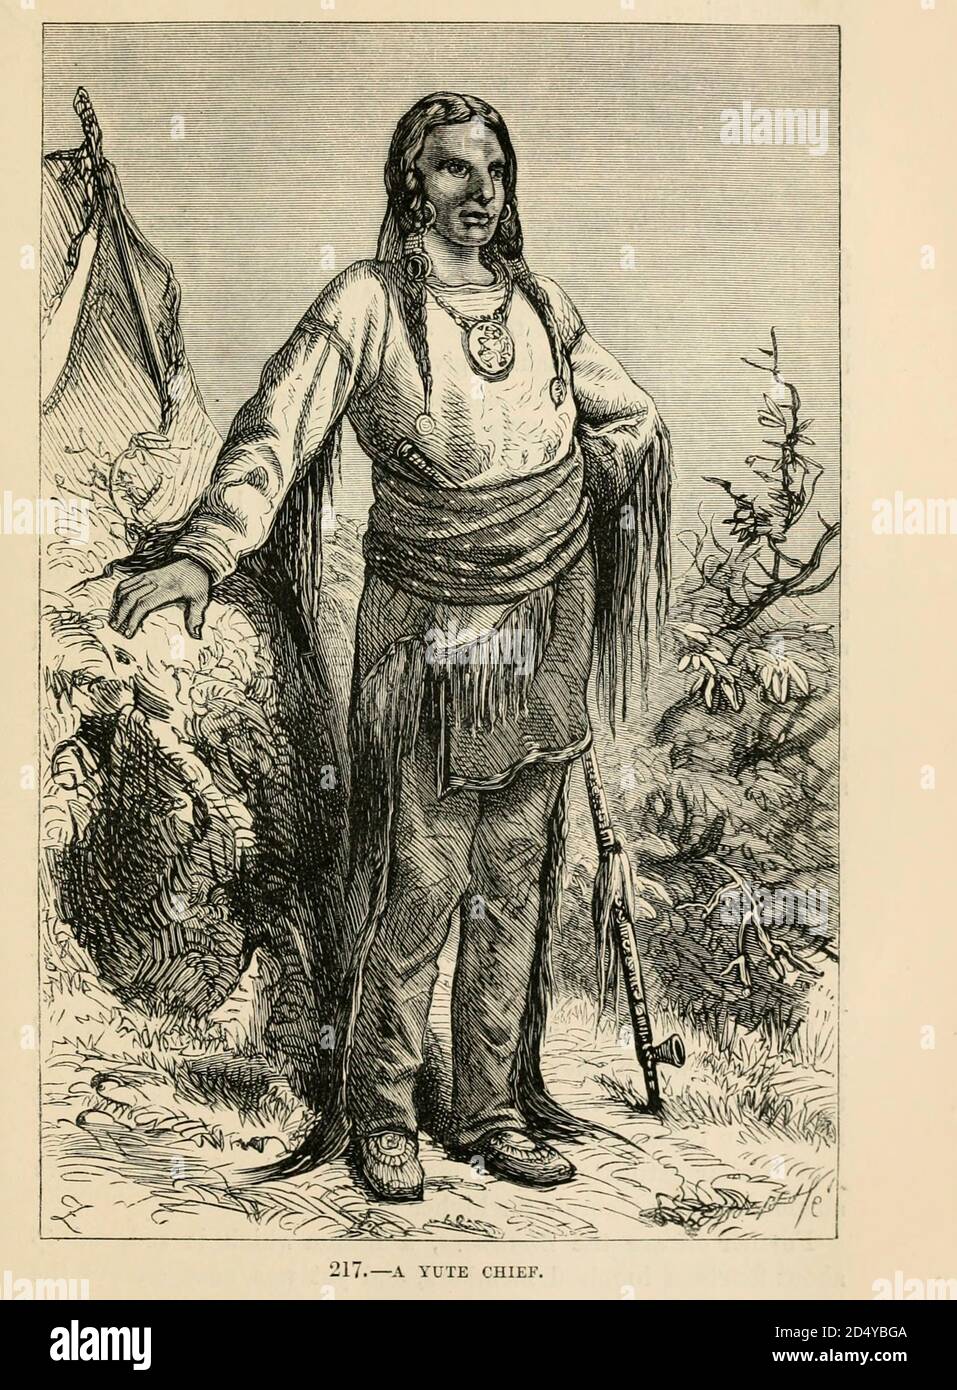 Yute (Ouray or Ute) Chief engraving on wood From The human race by Figuier, Louis, (1819-1894) Publication in 1872 Publisher: New York, Appleton Stock Photo